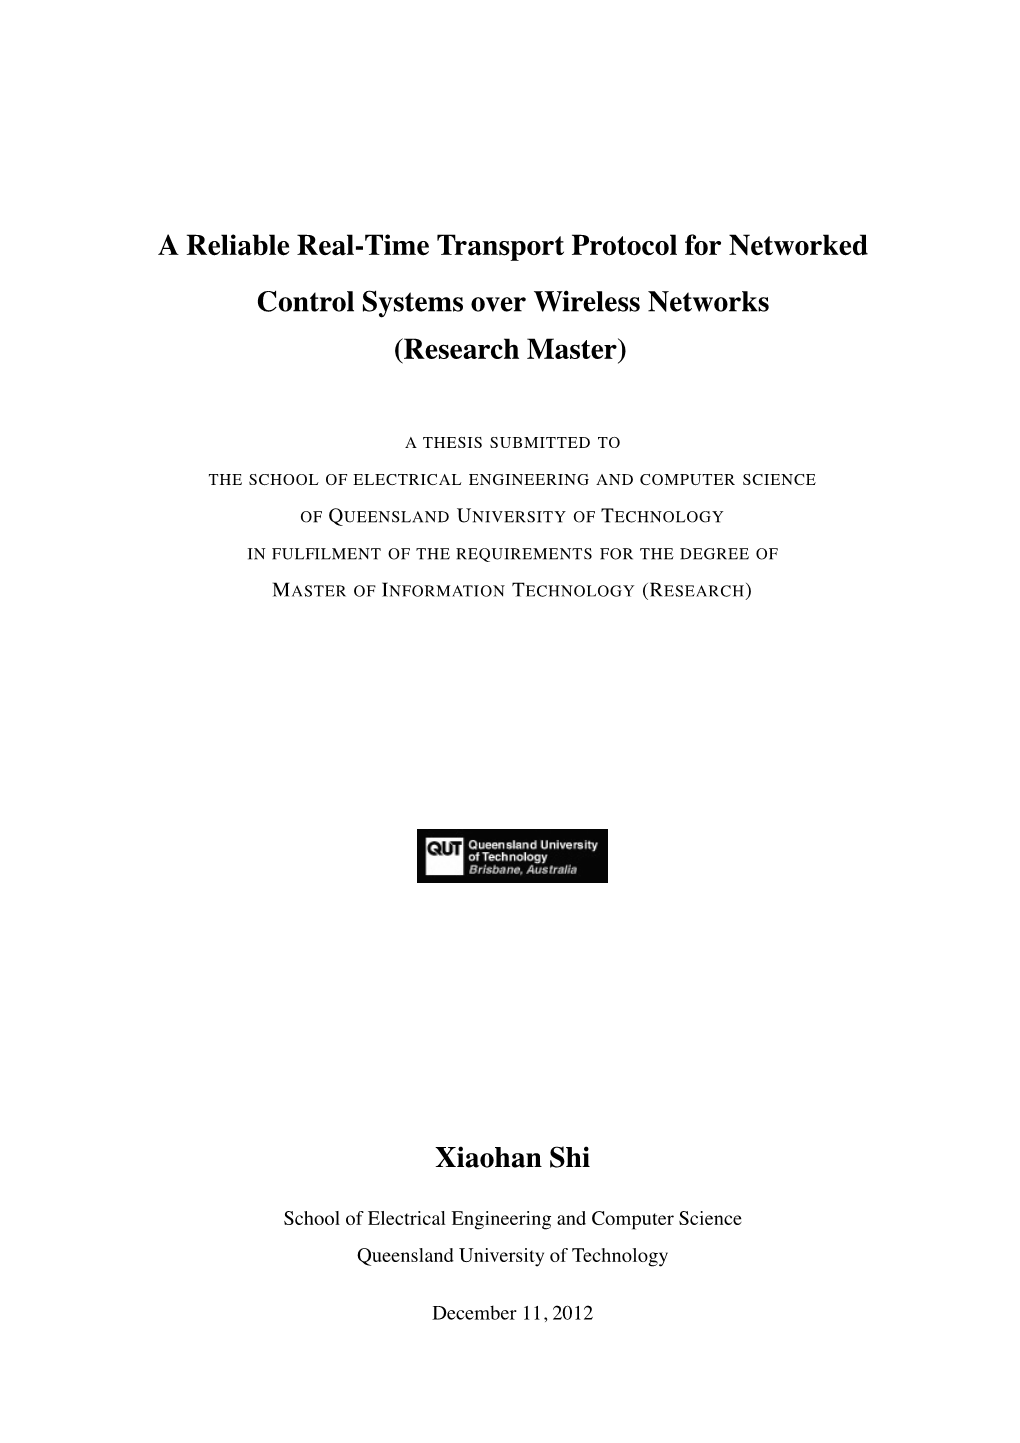 A Reliable Real-Time Transport Protocol for Networked Control